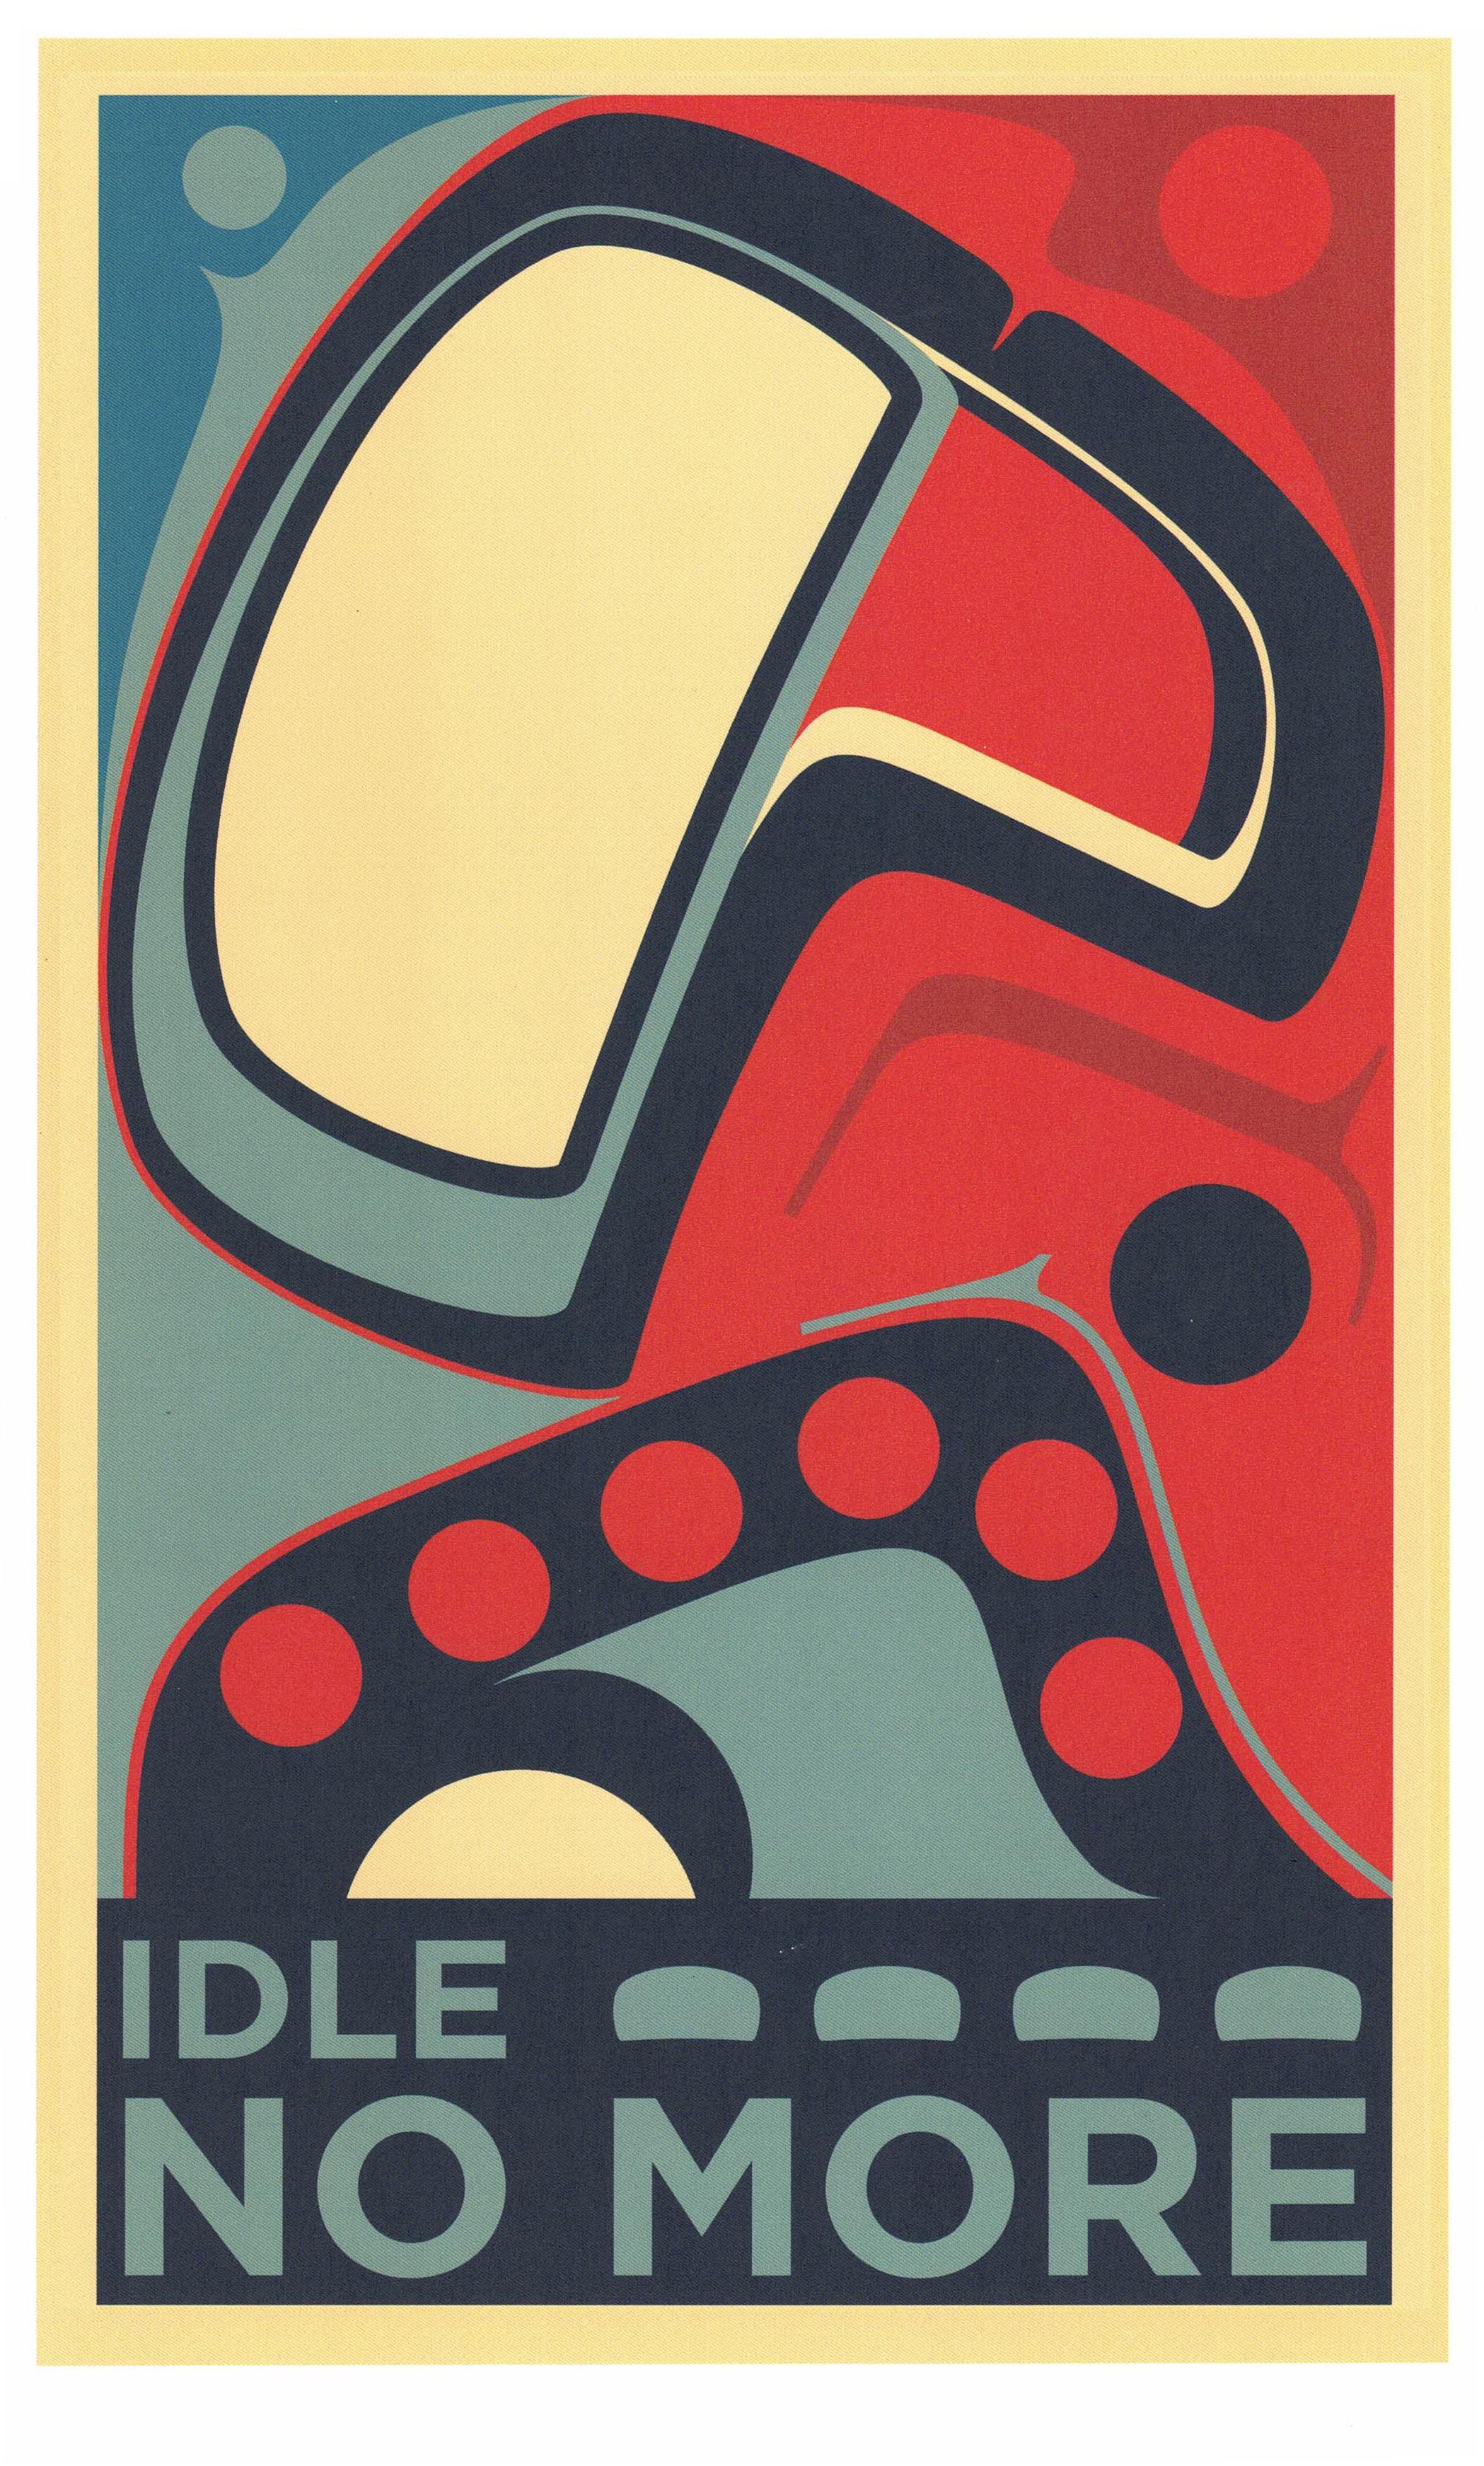 Sonny Assu Abstract Print - There is Hope, If We Rise (Idle No More)